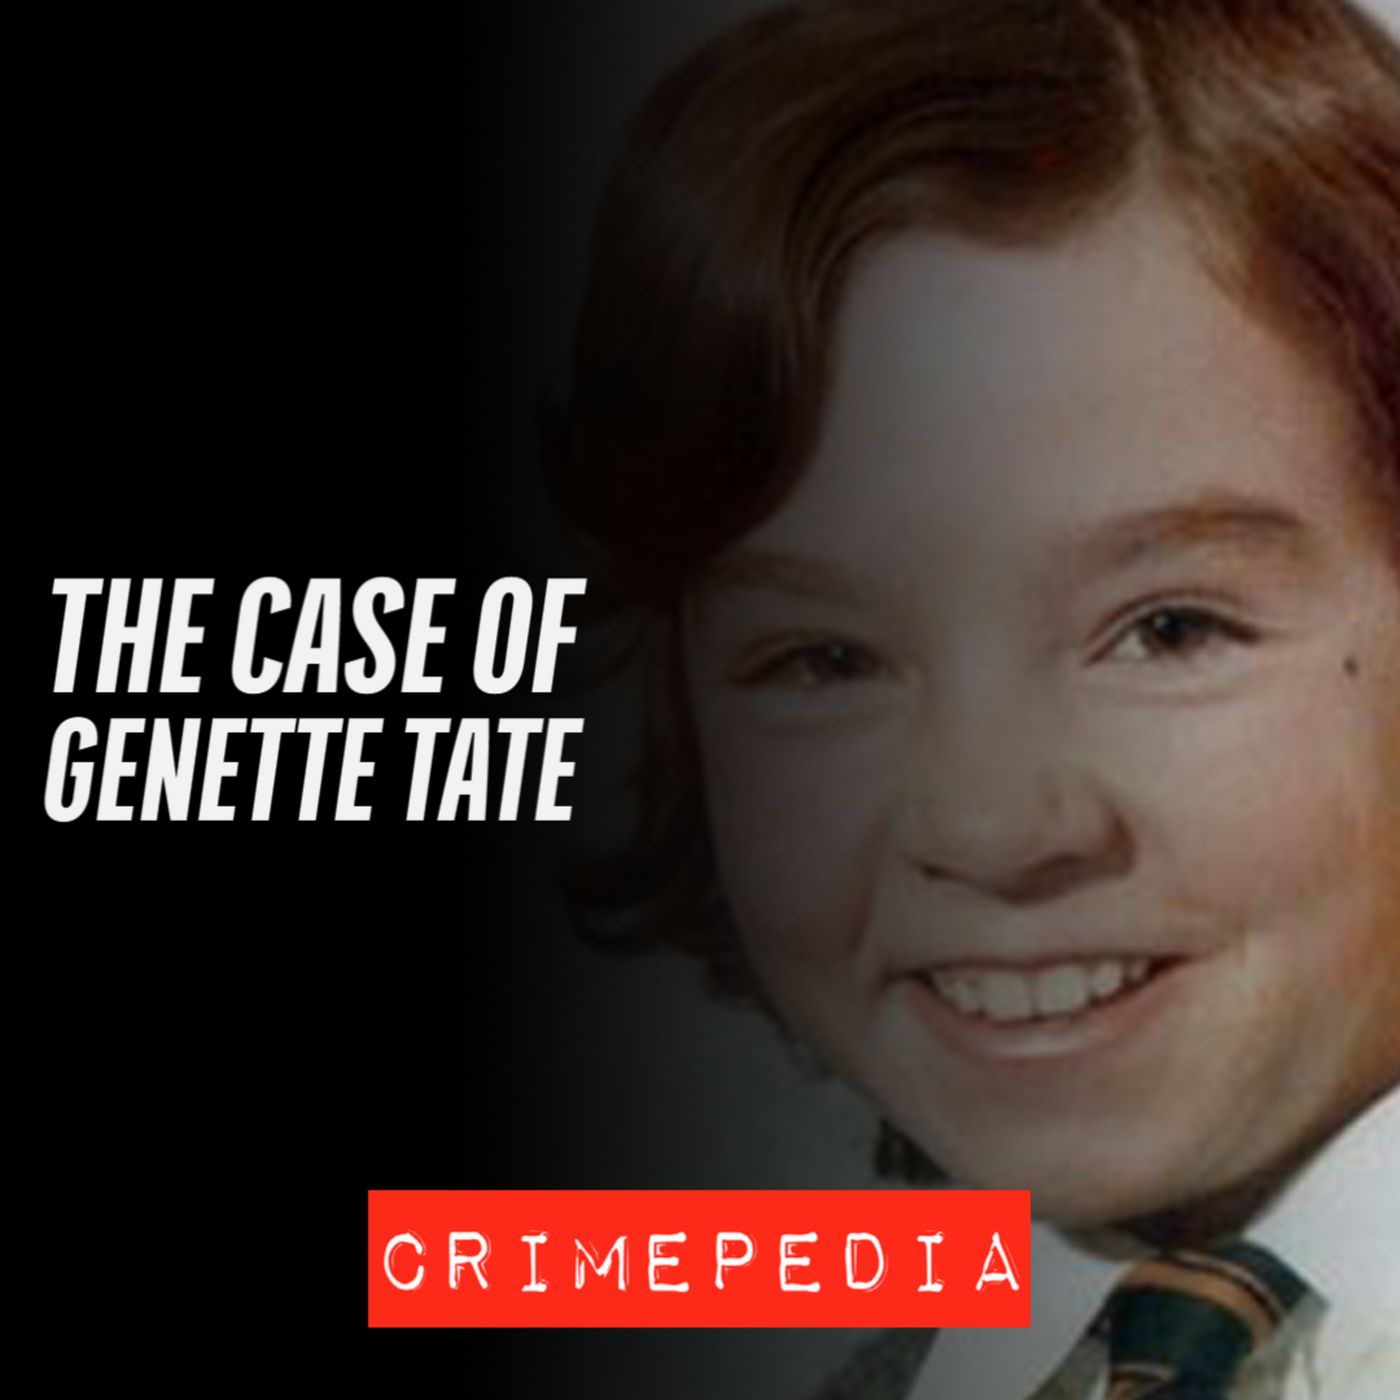 The Case of Genette Tate